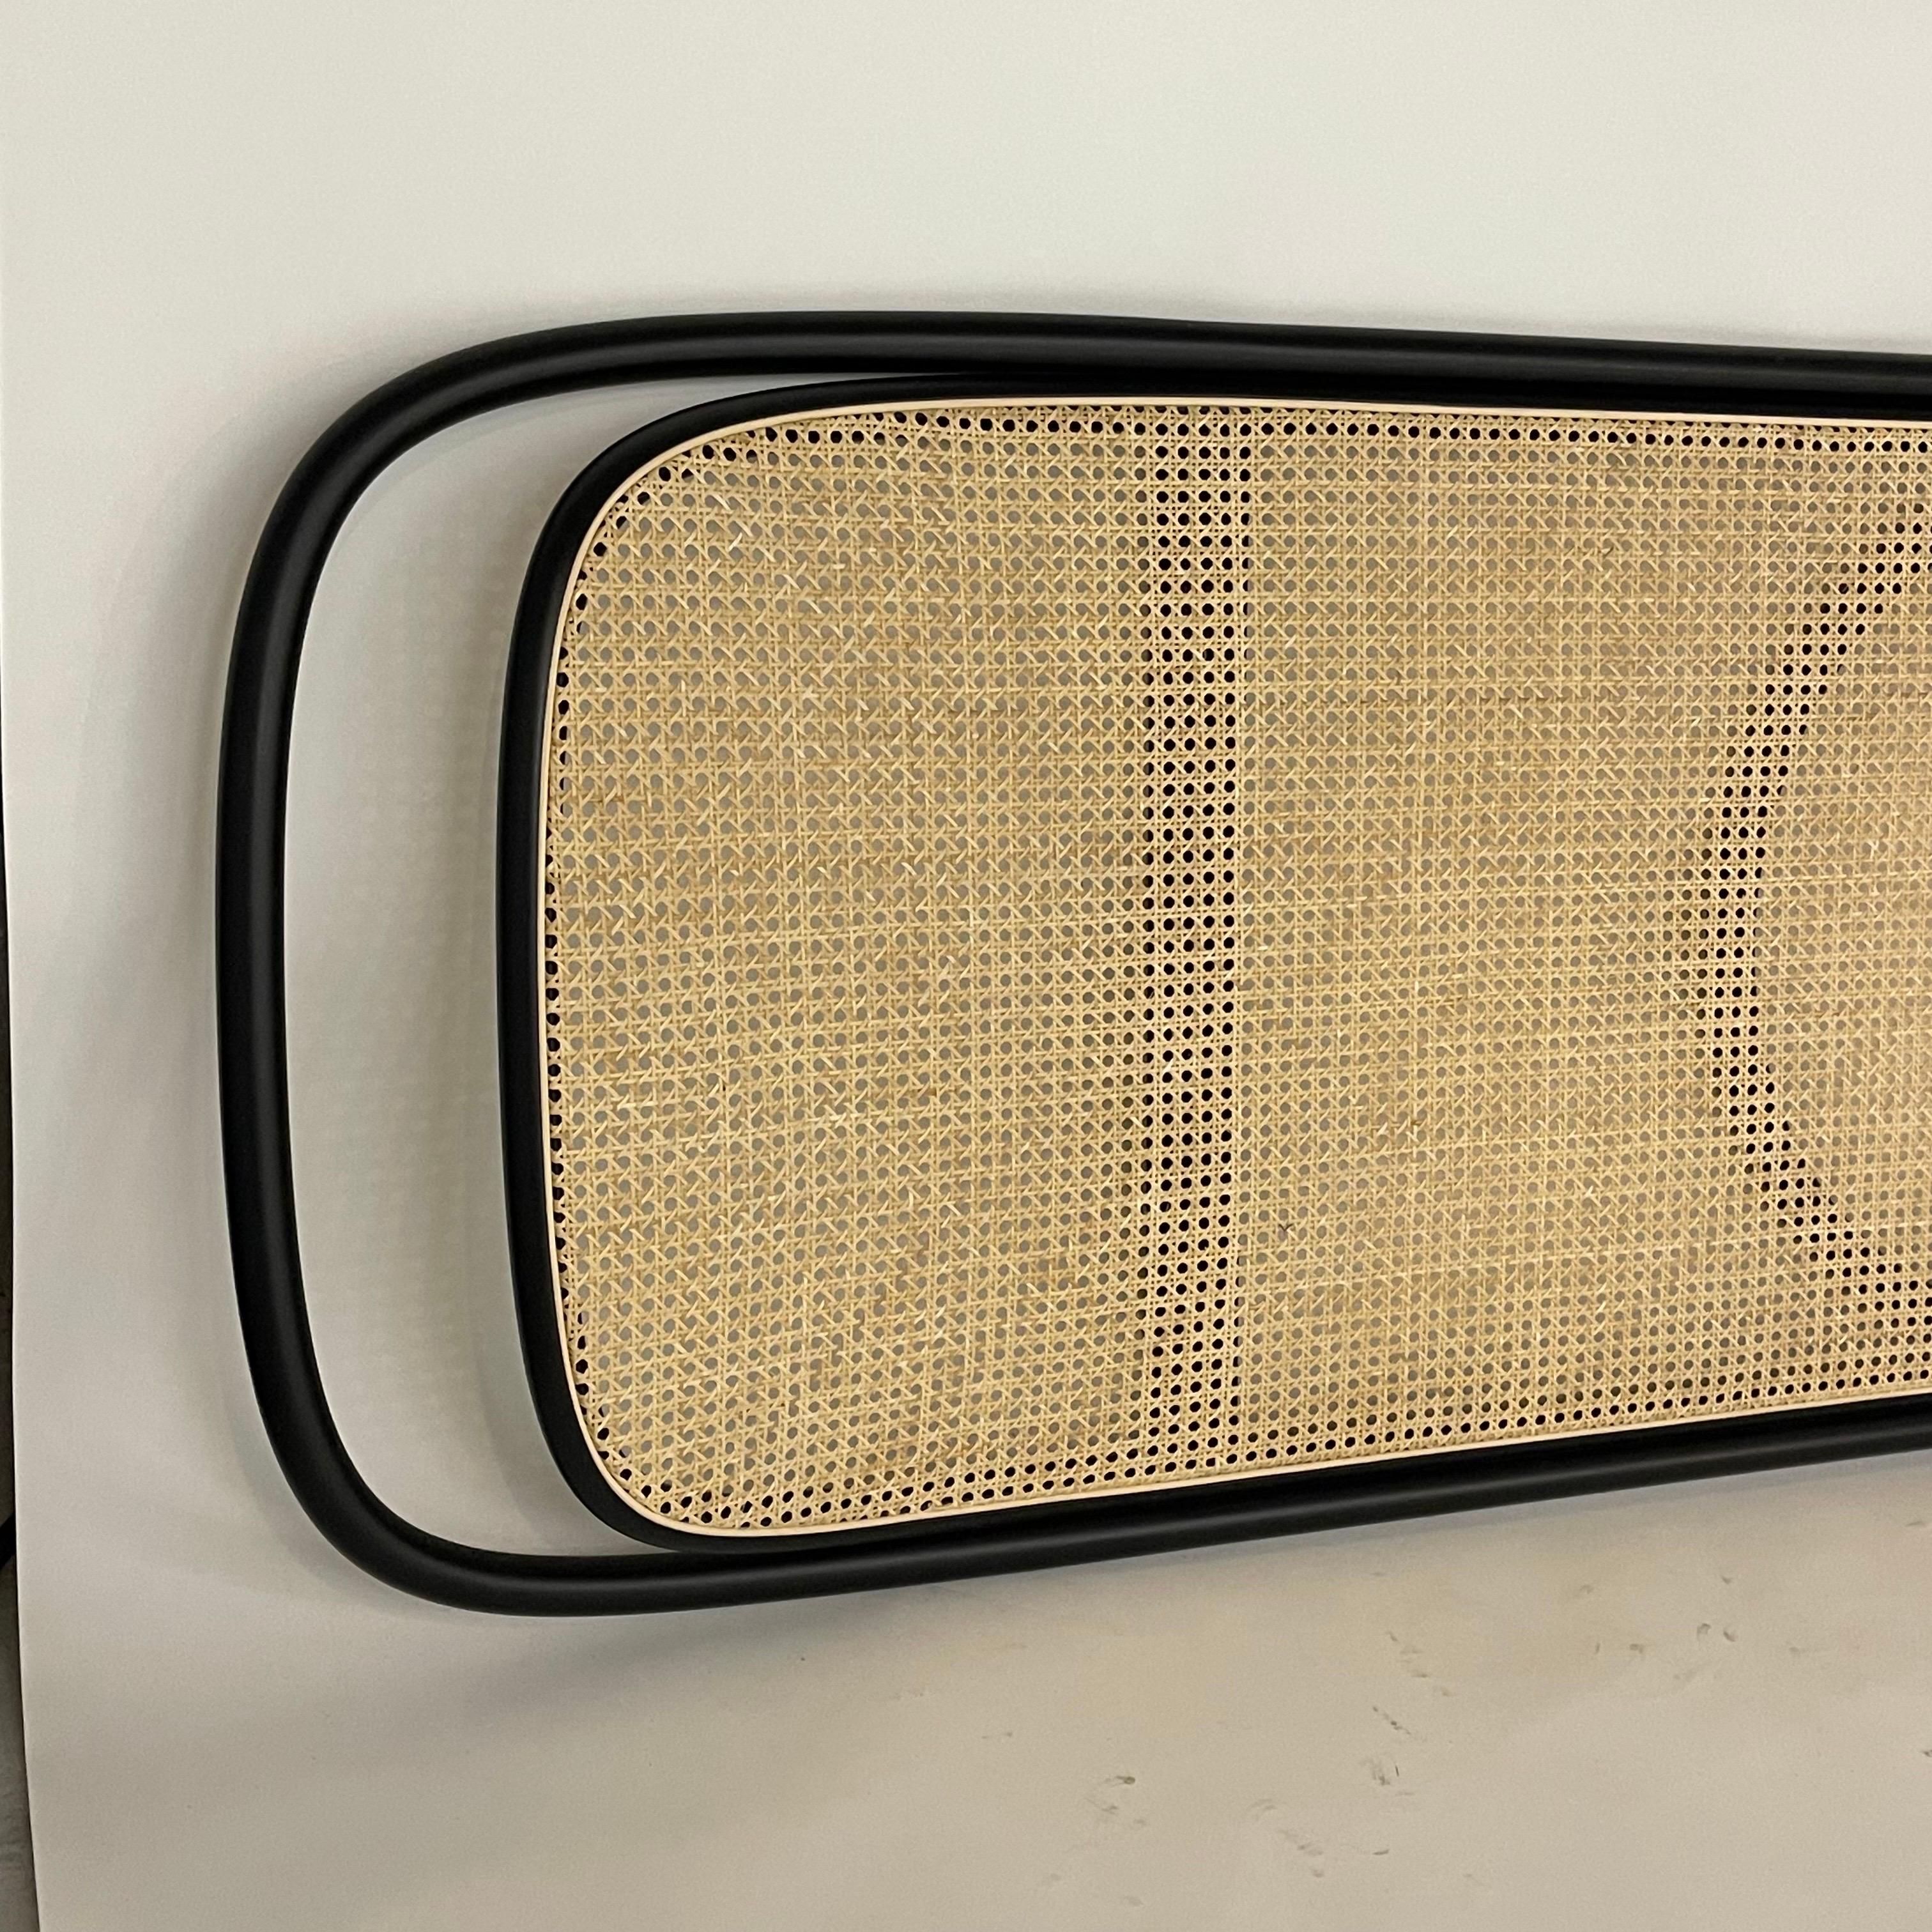 Rue Headboard wall mounted, rendered in black painted bentwood frame with cane upholstery (finish C01 - C01 - RAL 9005 Black, Cat. C cane upholstery) designed by GamFratesi for Gebrüder Thonet Vienna, Itay, 2019.